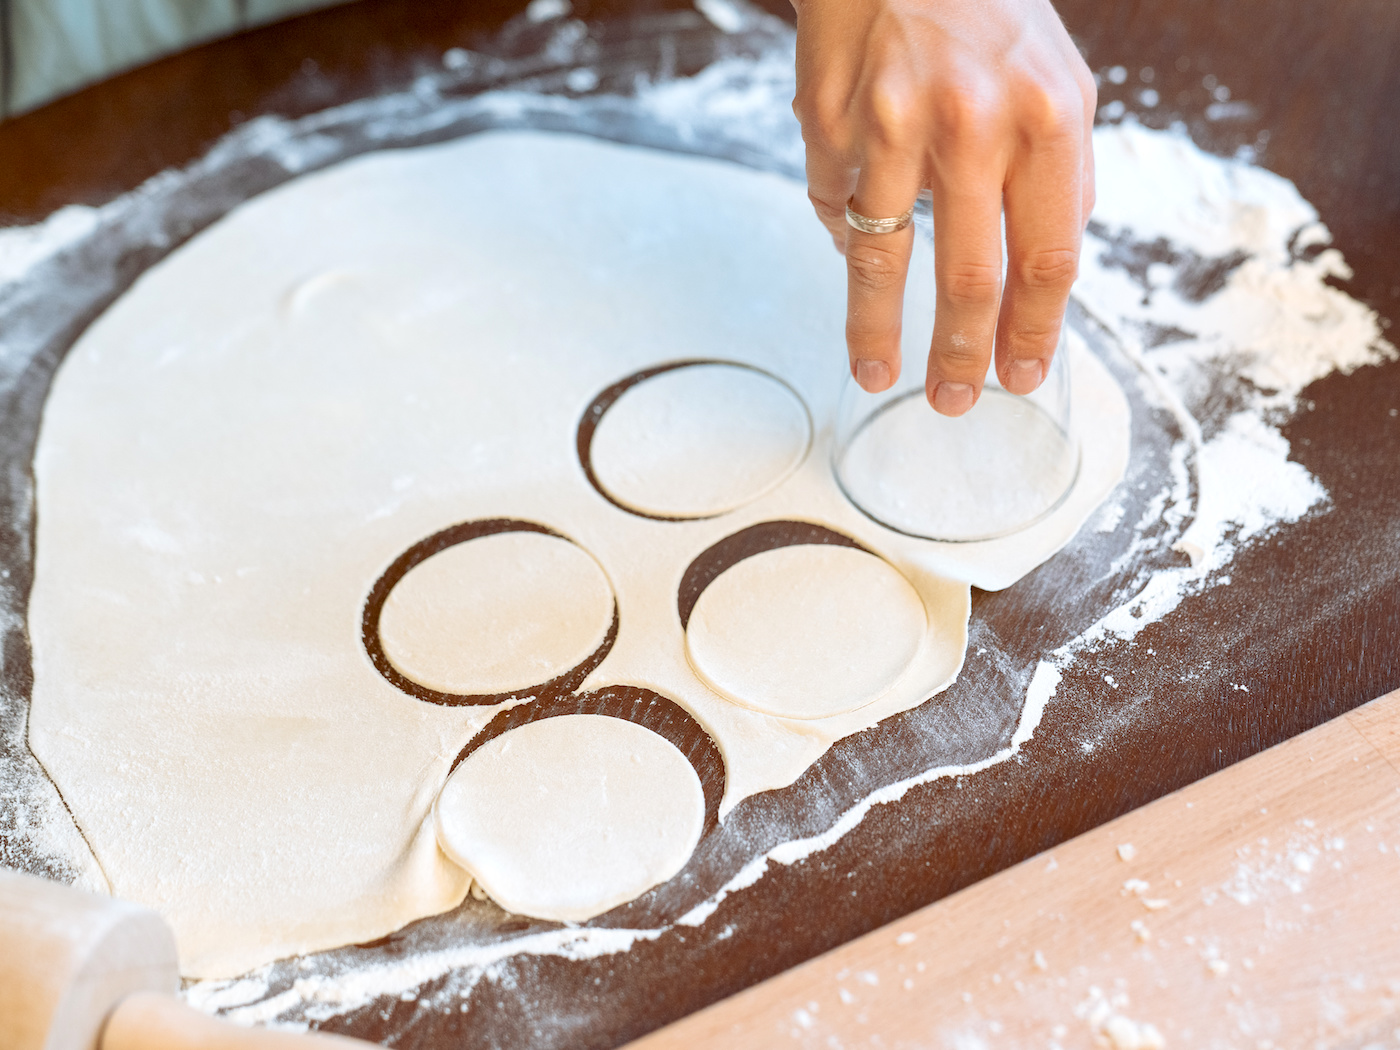 Cutting-out-circles-in-dough-with-a-glass